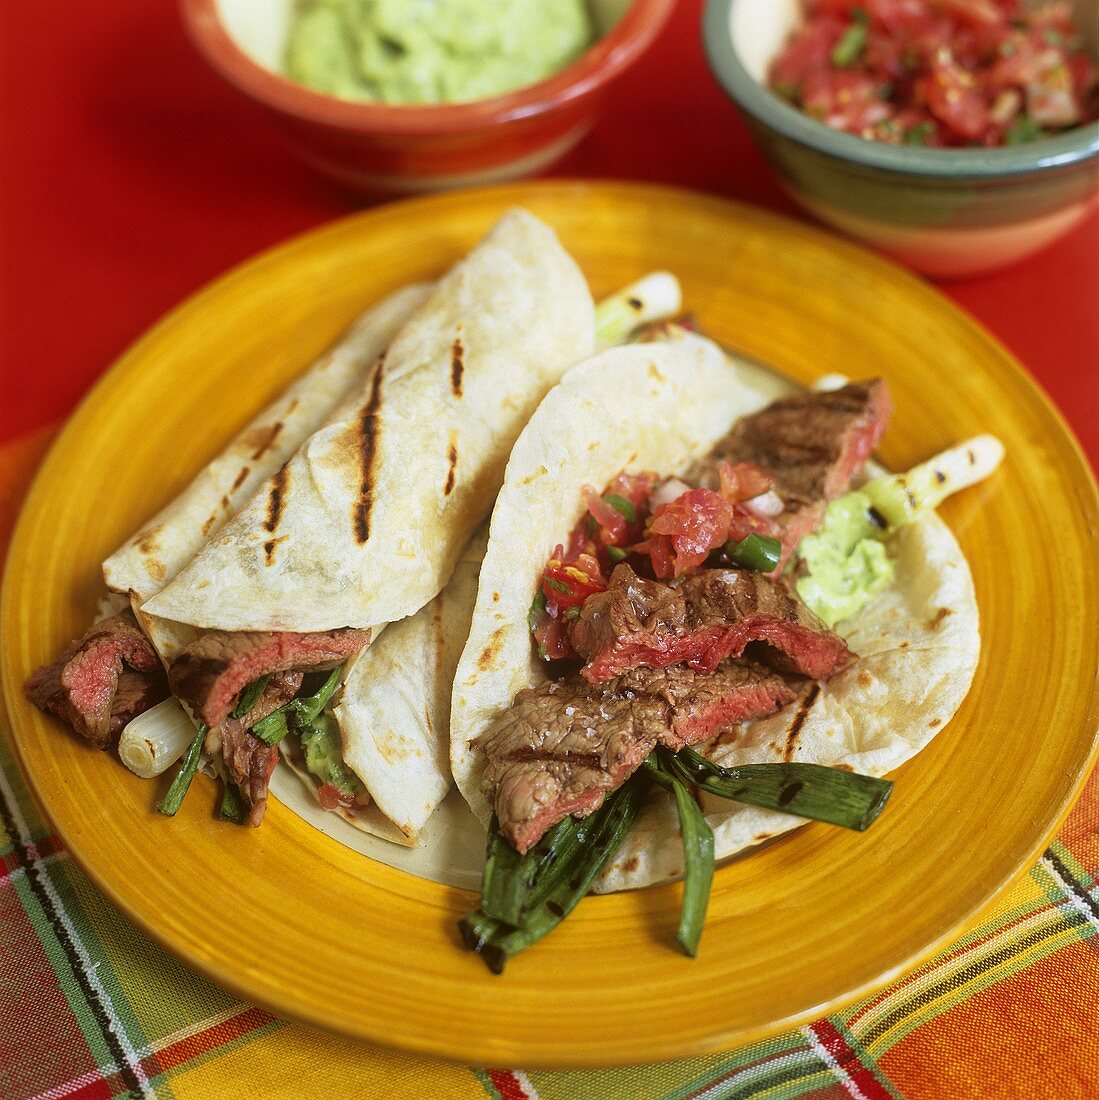 Wheat tortillas with beef and spring onions